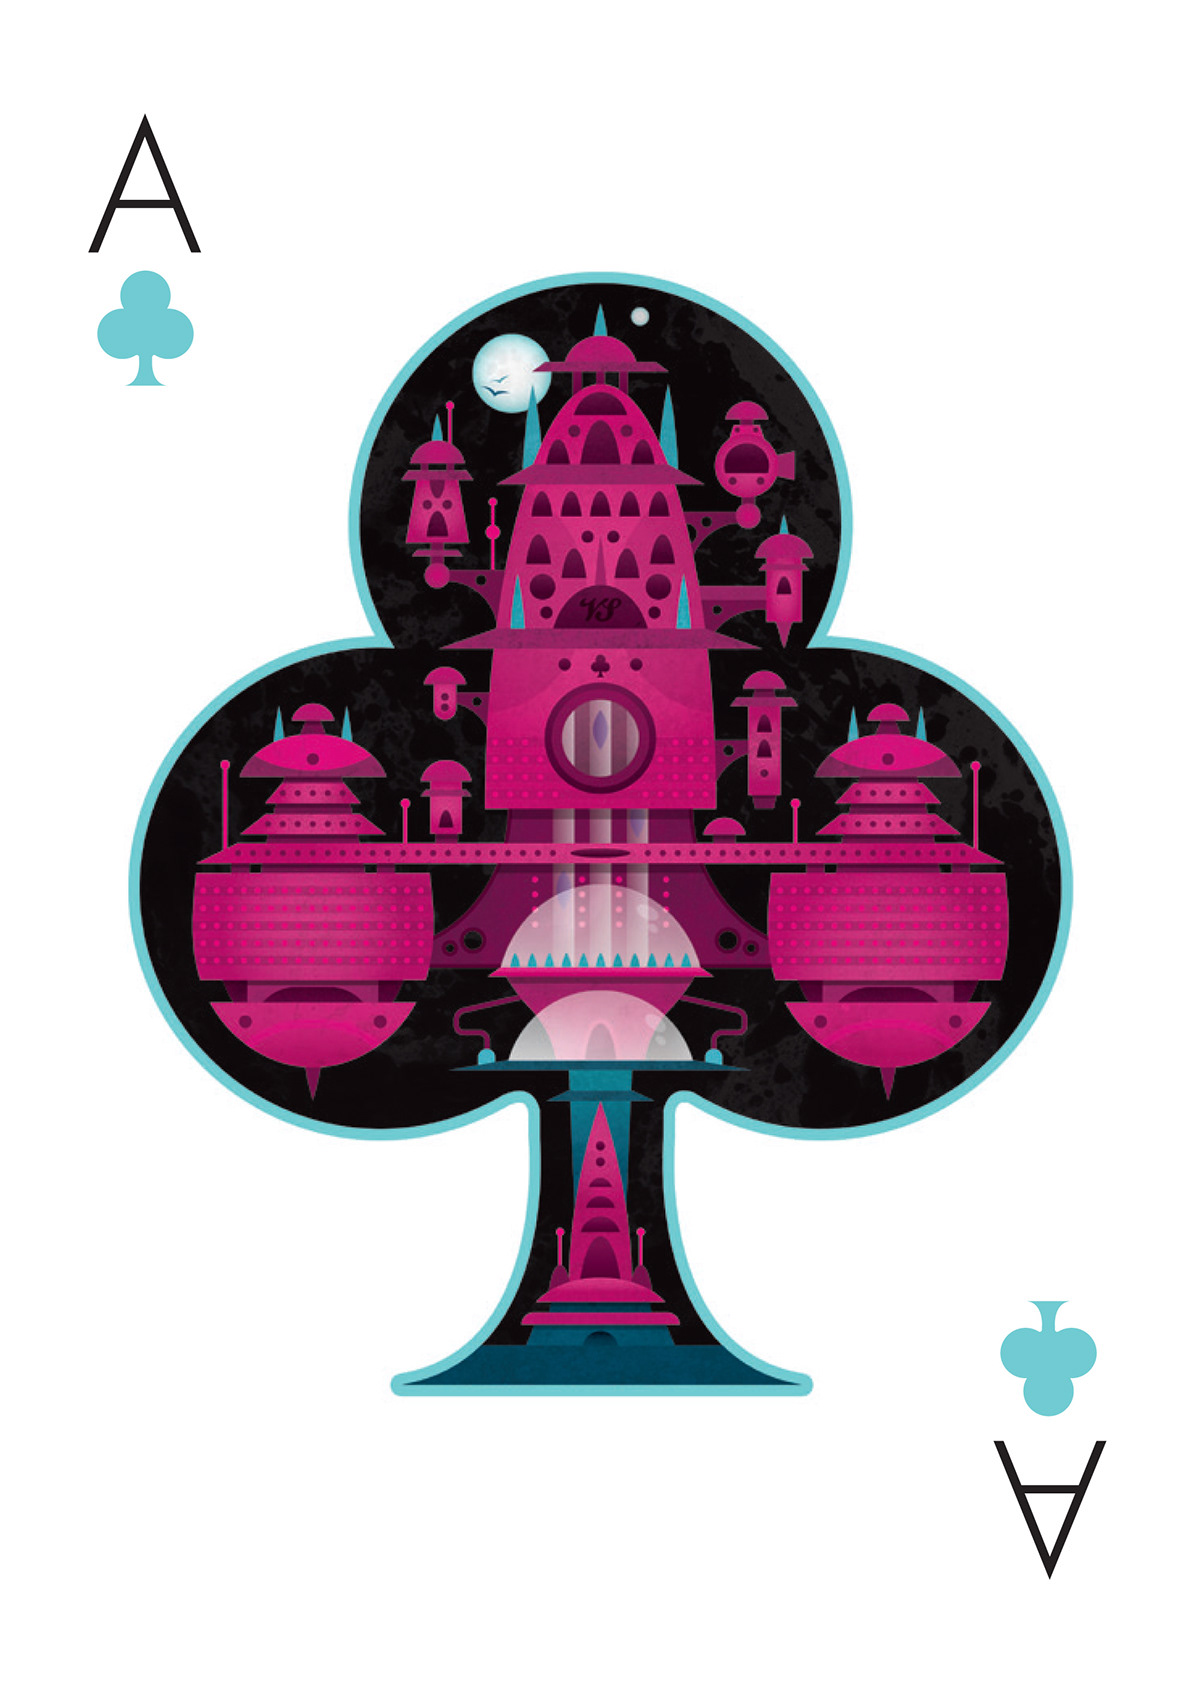 cards ace Playing Cards futuristic sci-fi detail detailed city heart diamond  club spade vector